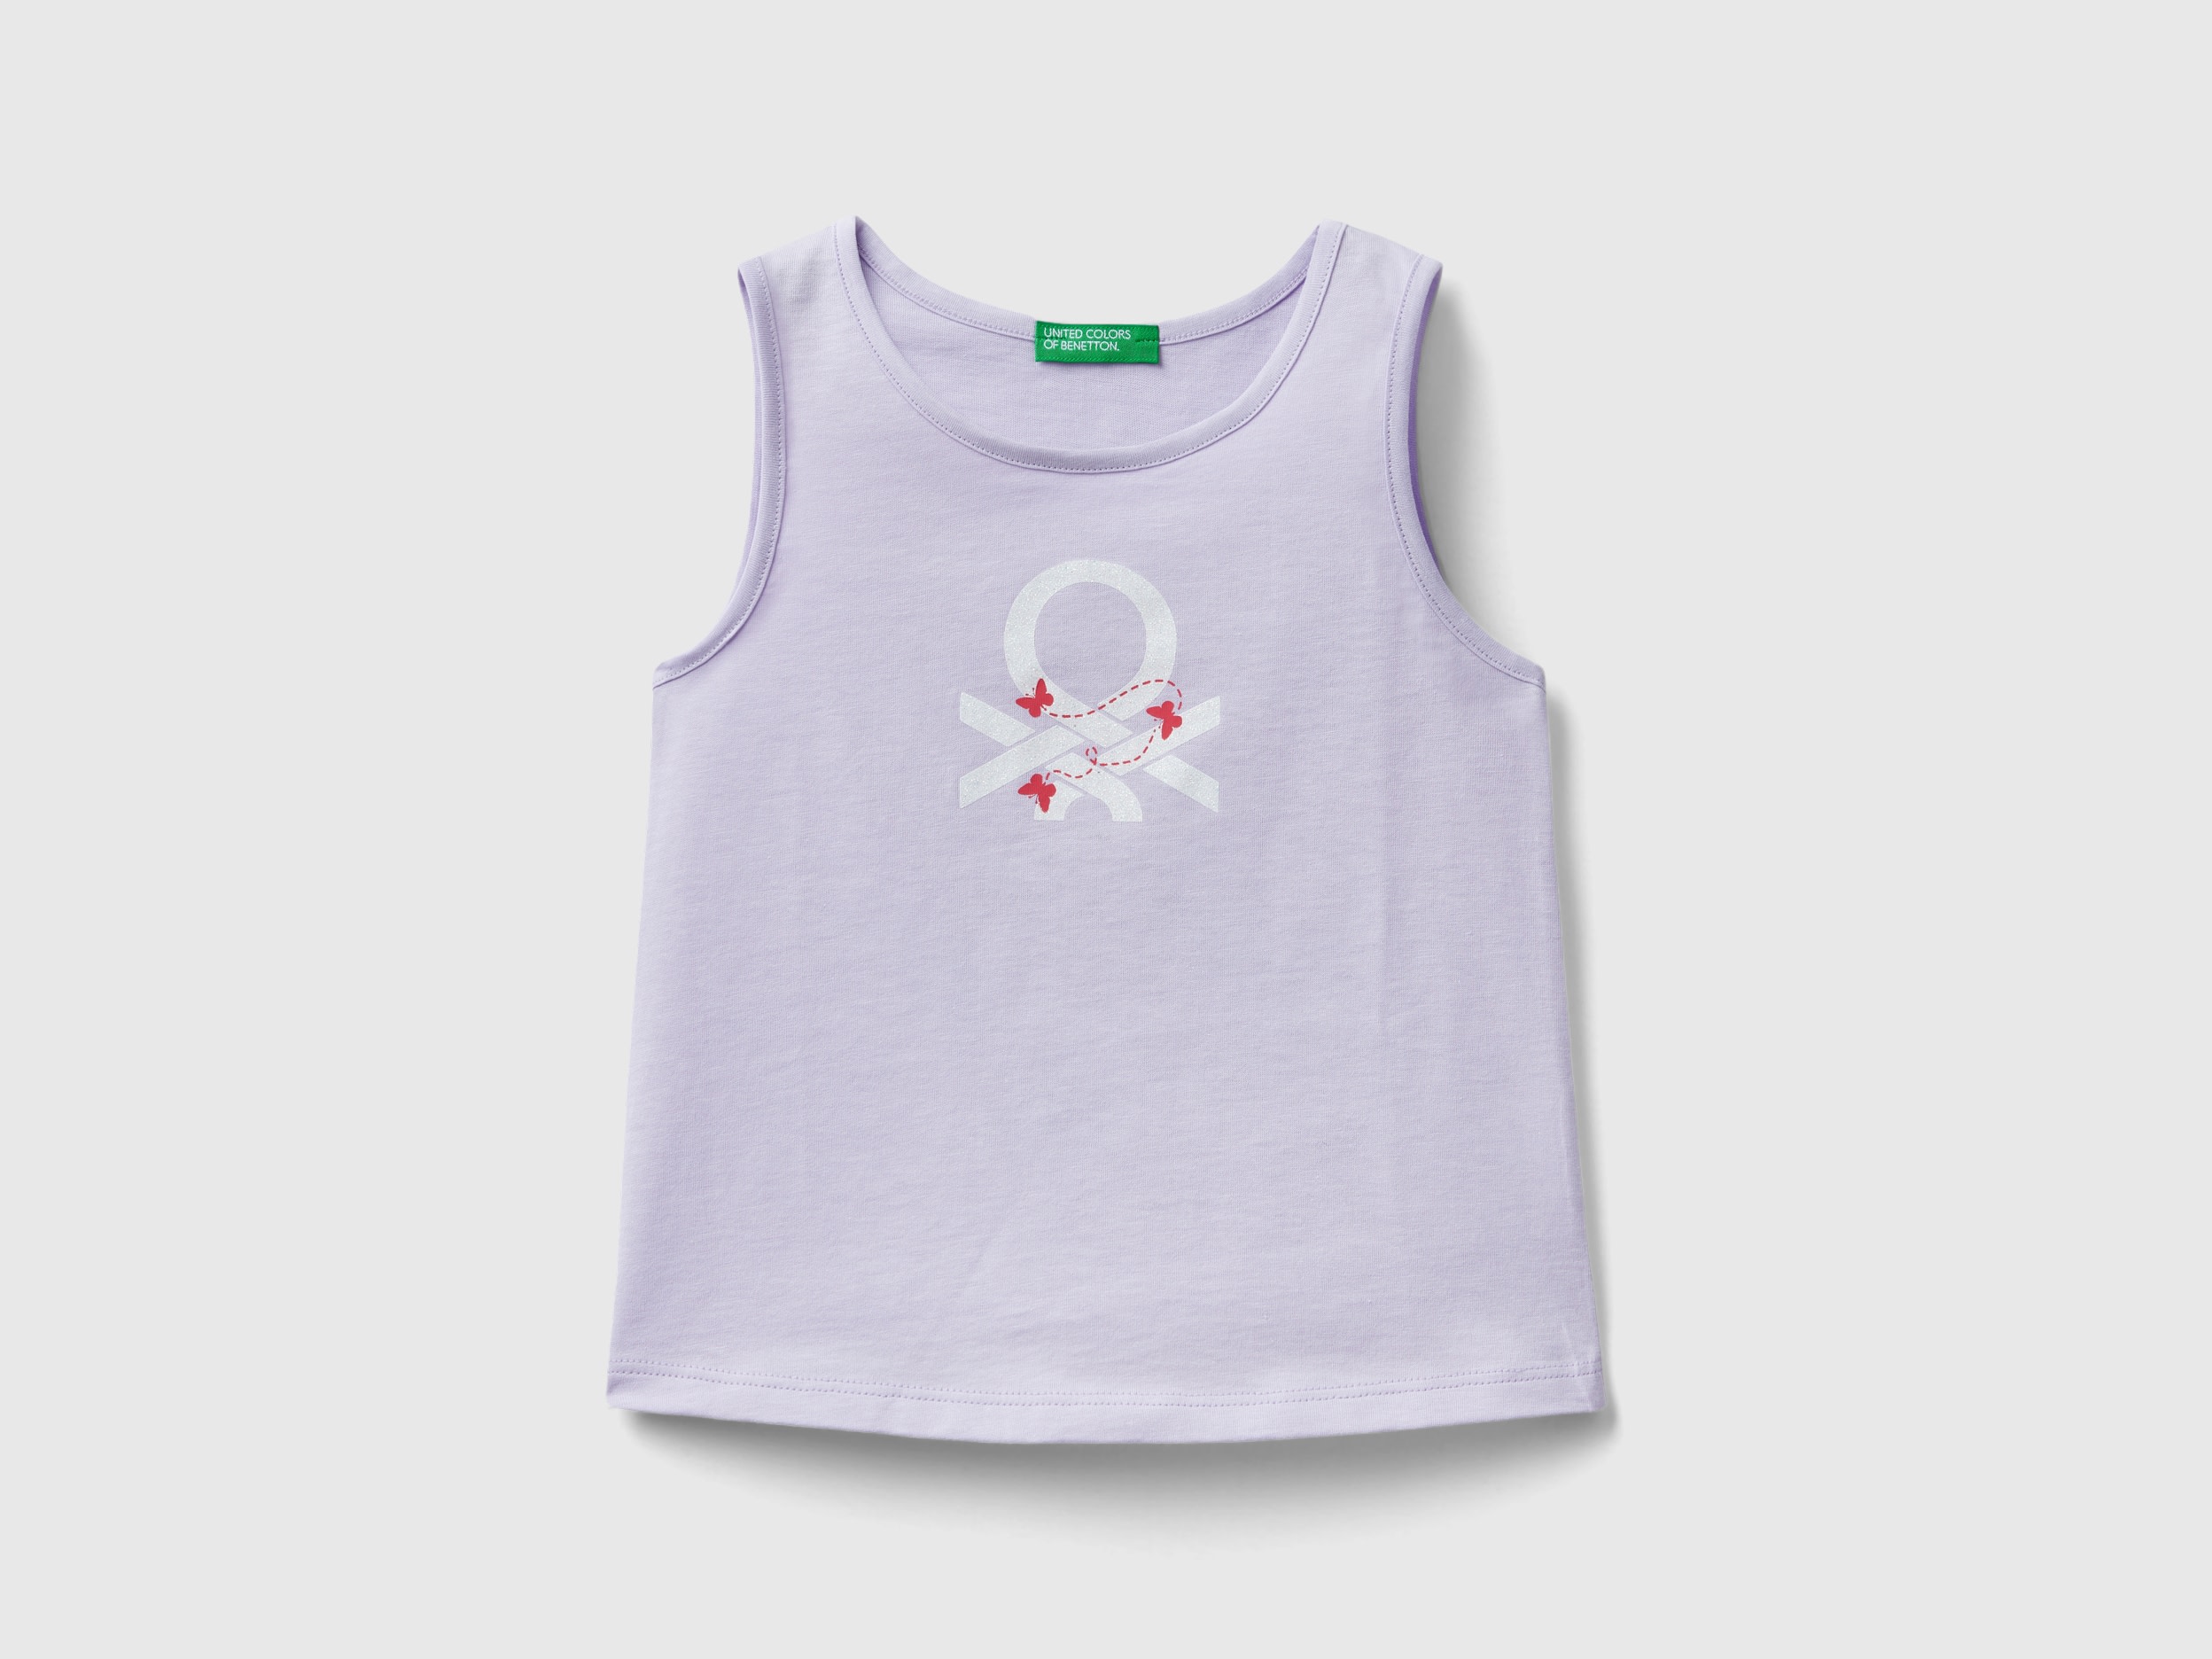 Image of Benetton, Tank Top In Organic Cotton, size 98, Lilac, Kids